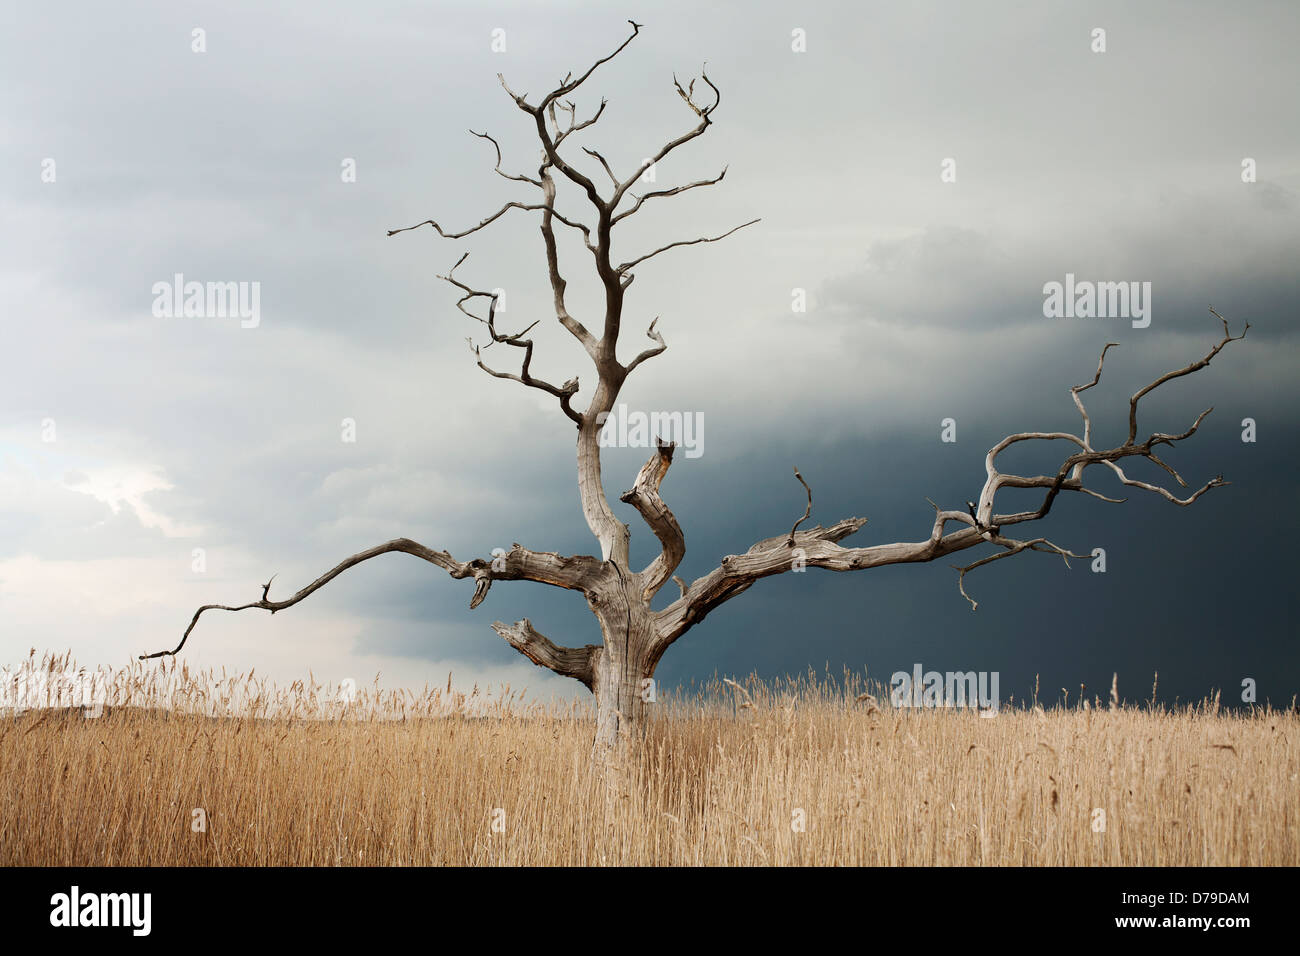 Dead Elm tree, Ulmus procera, standing against grey, cloudy sky in open area of reeds. Stock Photo